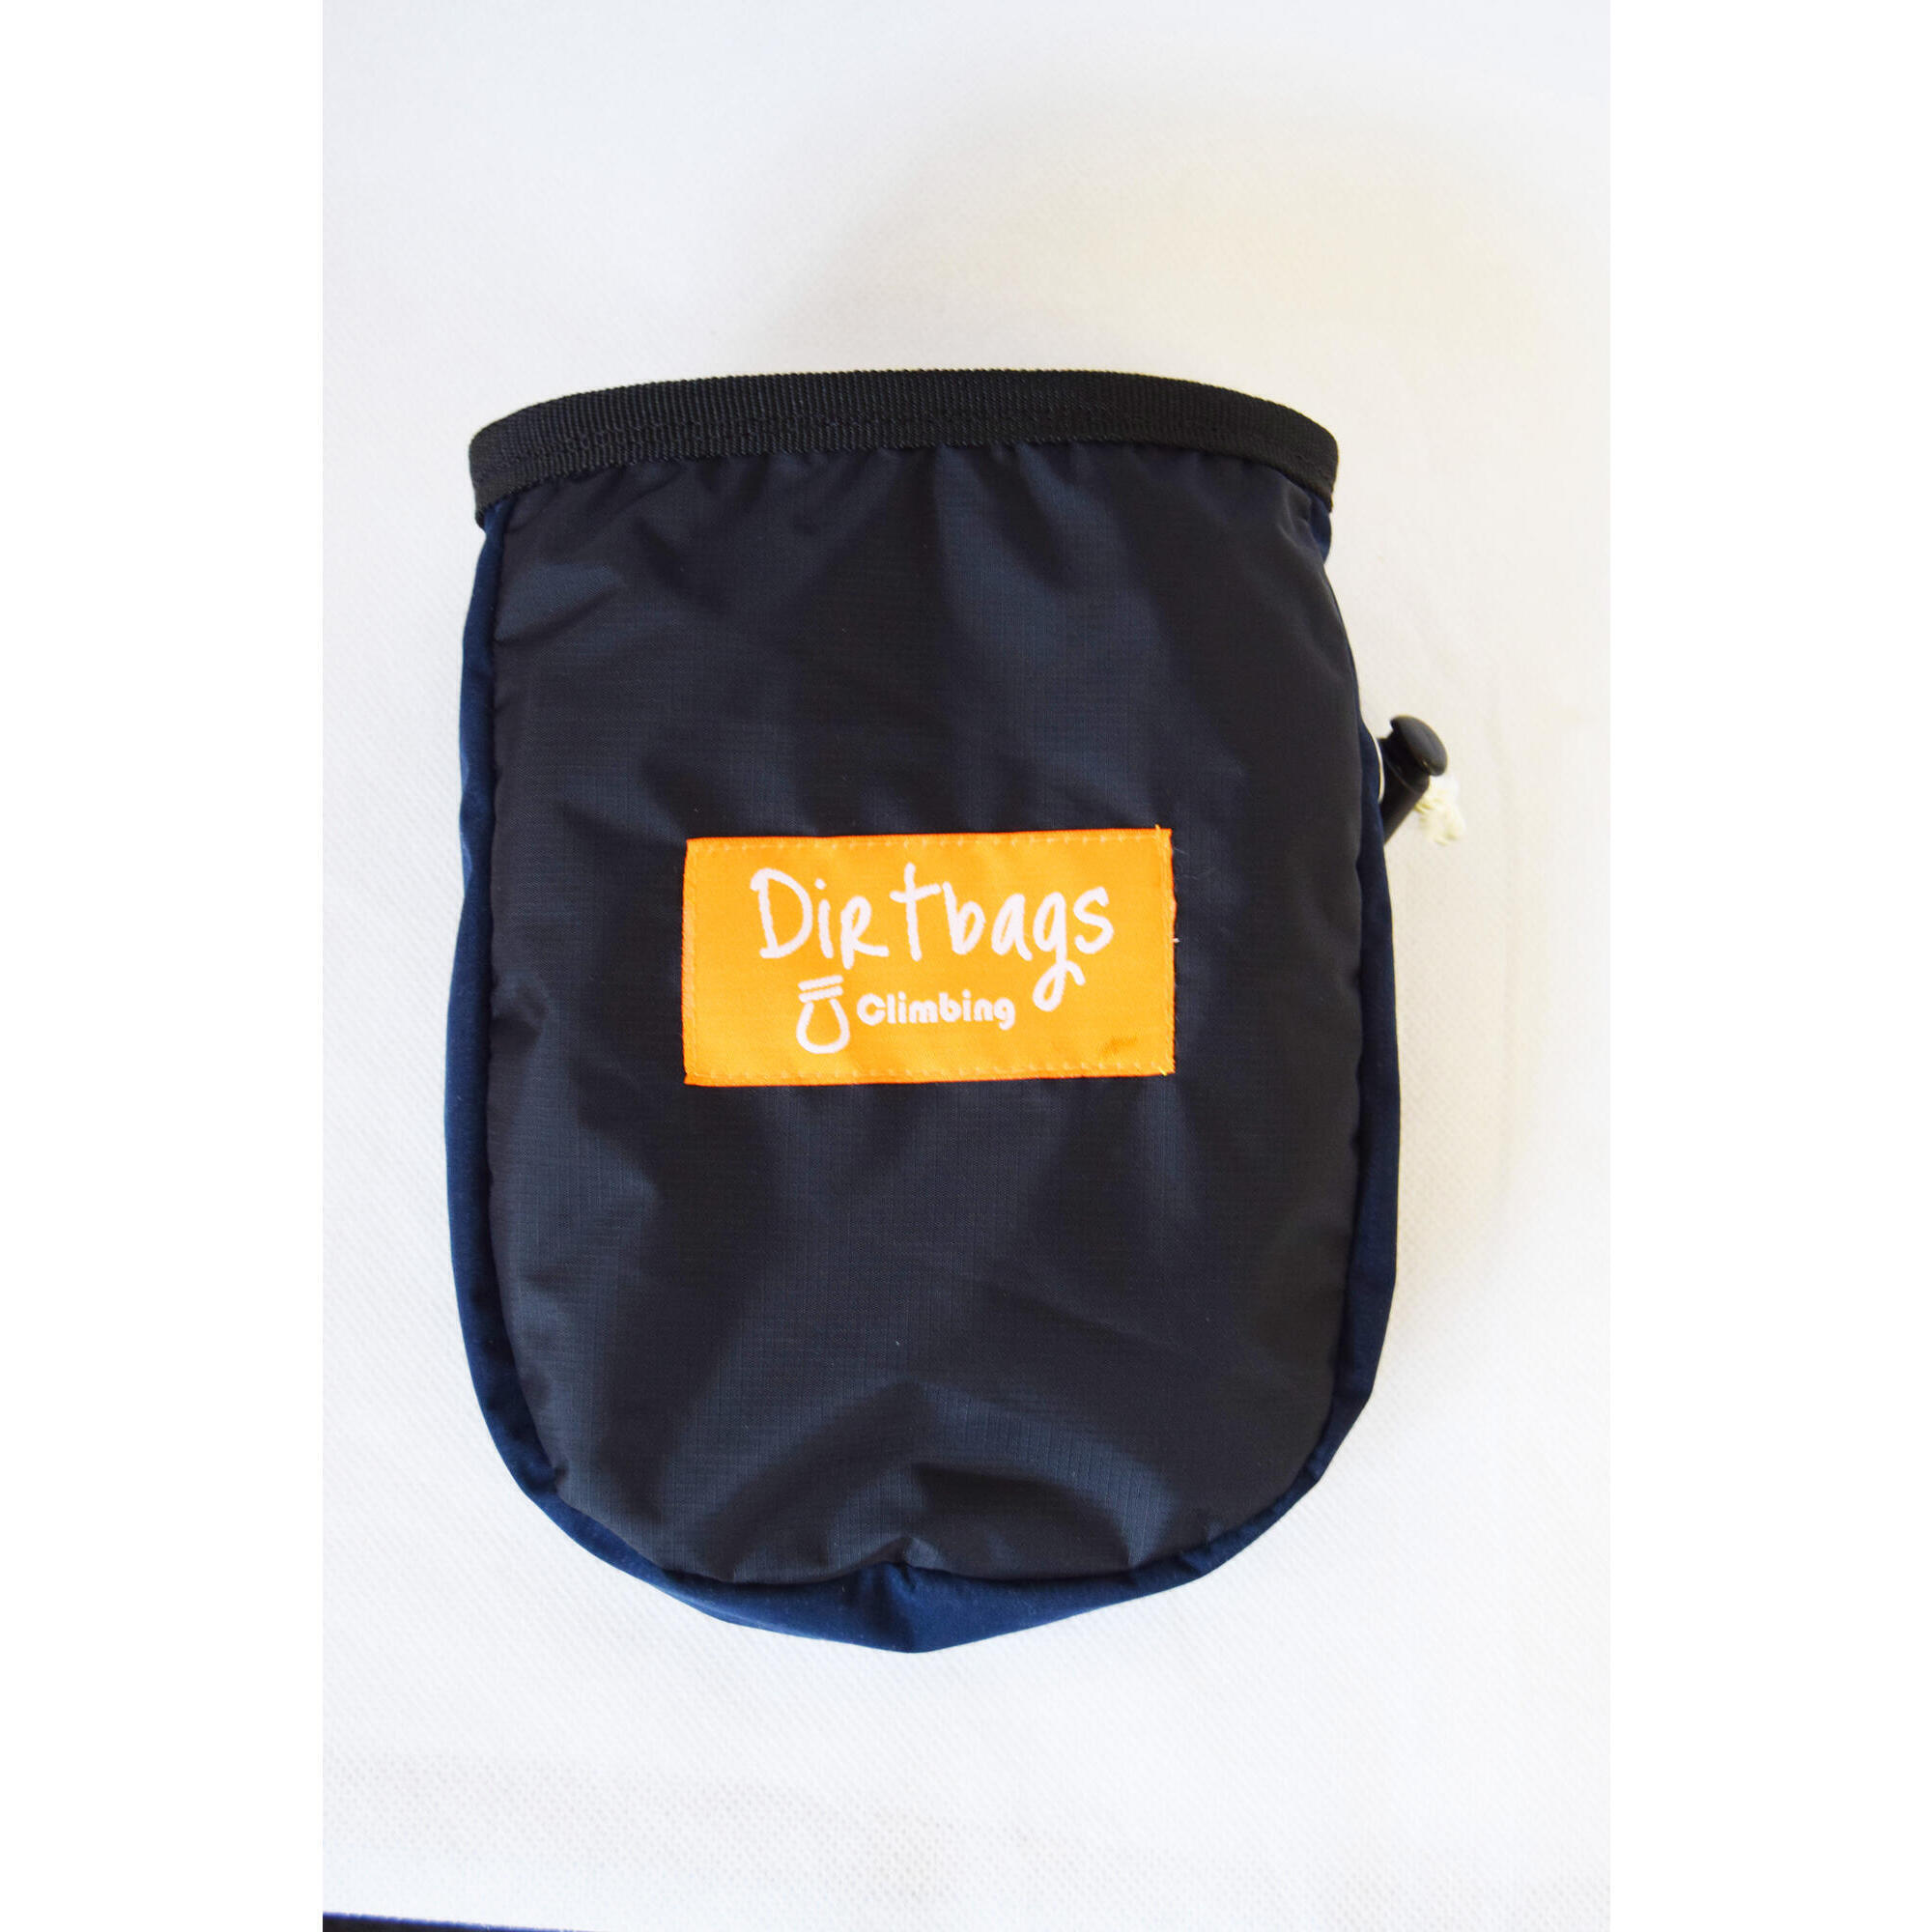 DIRTBAGS CLIMBING Upcycled fabric climbing chalk bag made in the UK / Black